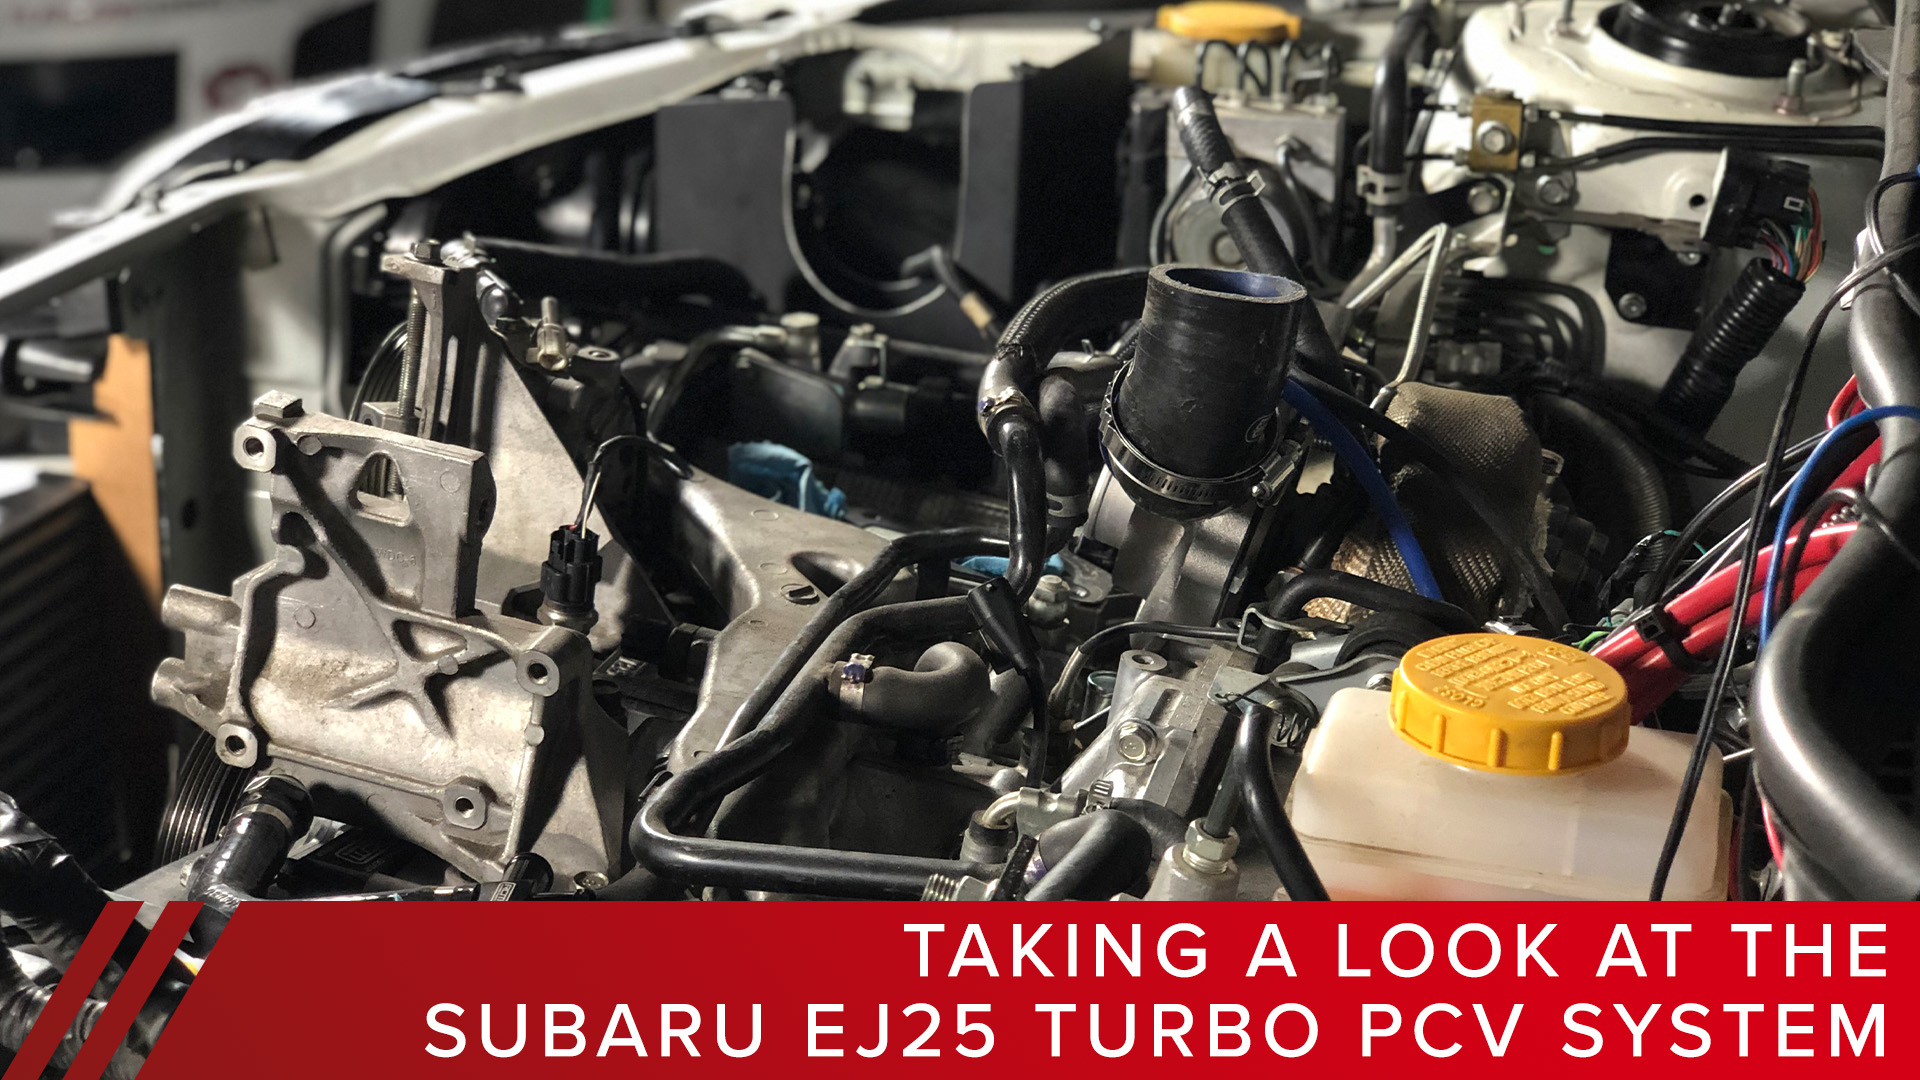 Taking a Look at the Subaru EJ25 Turbo PCV System